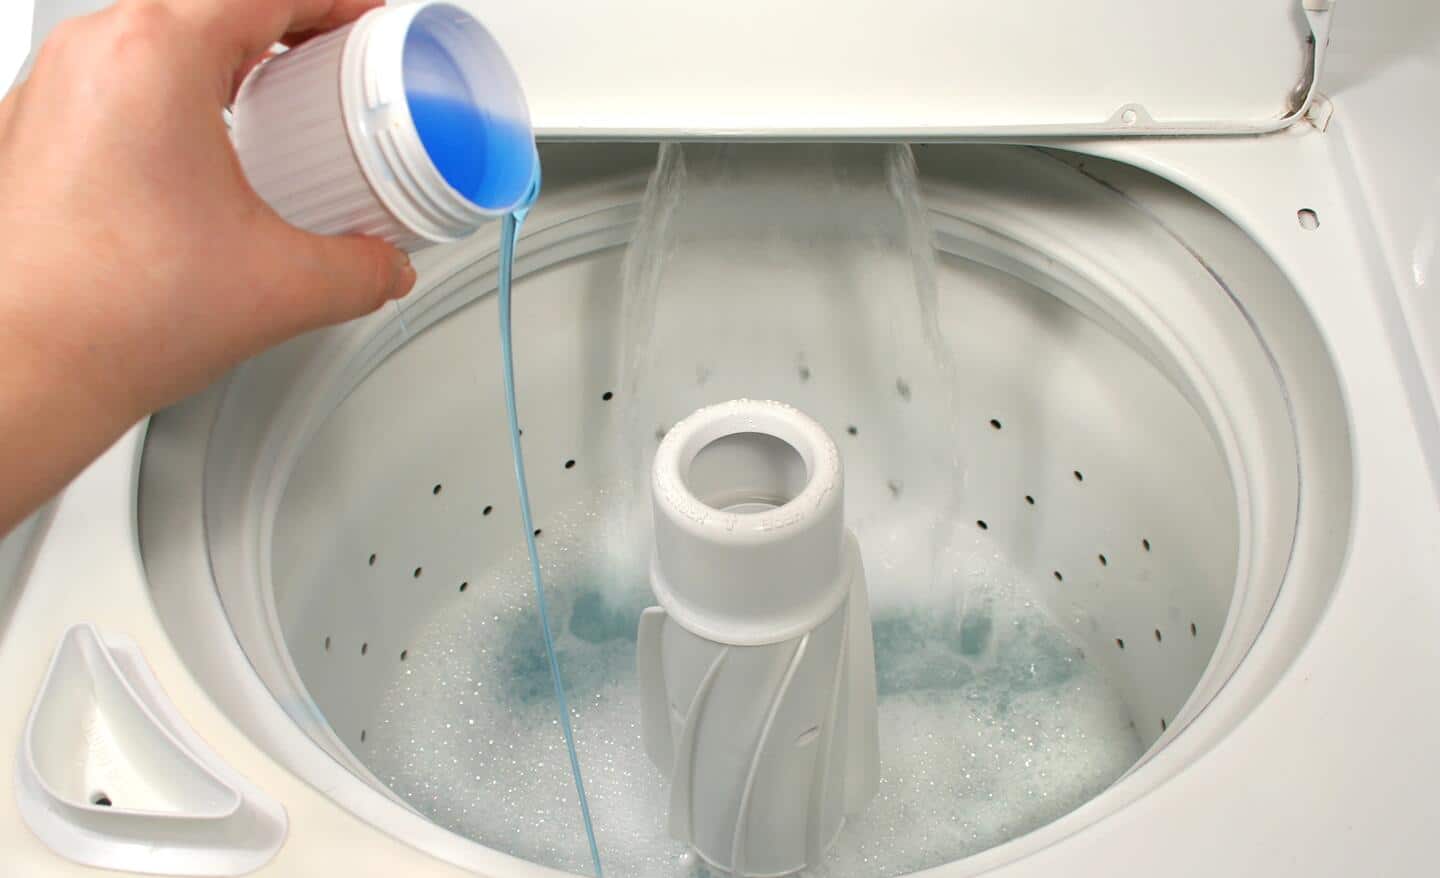 Someone pouring detergent into a top load washer.